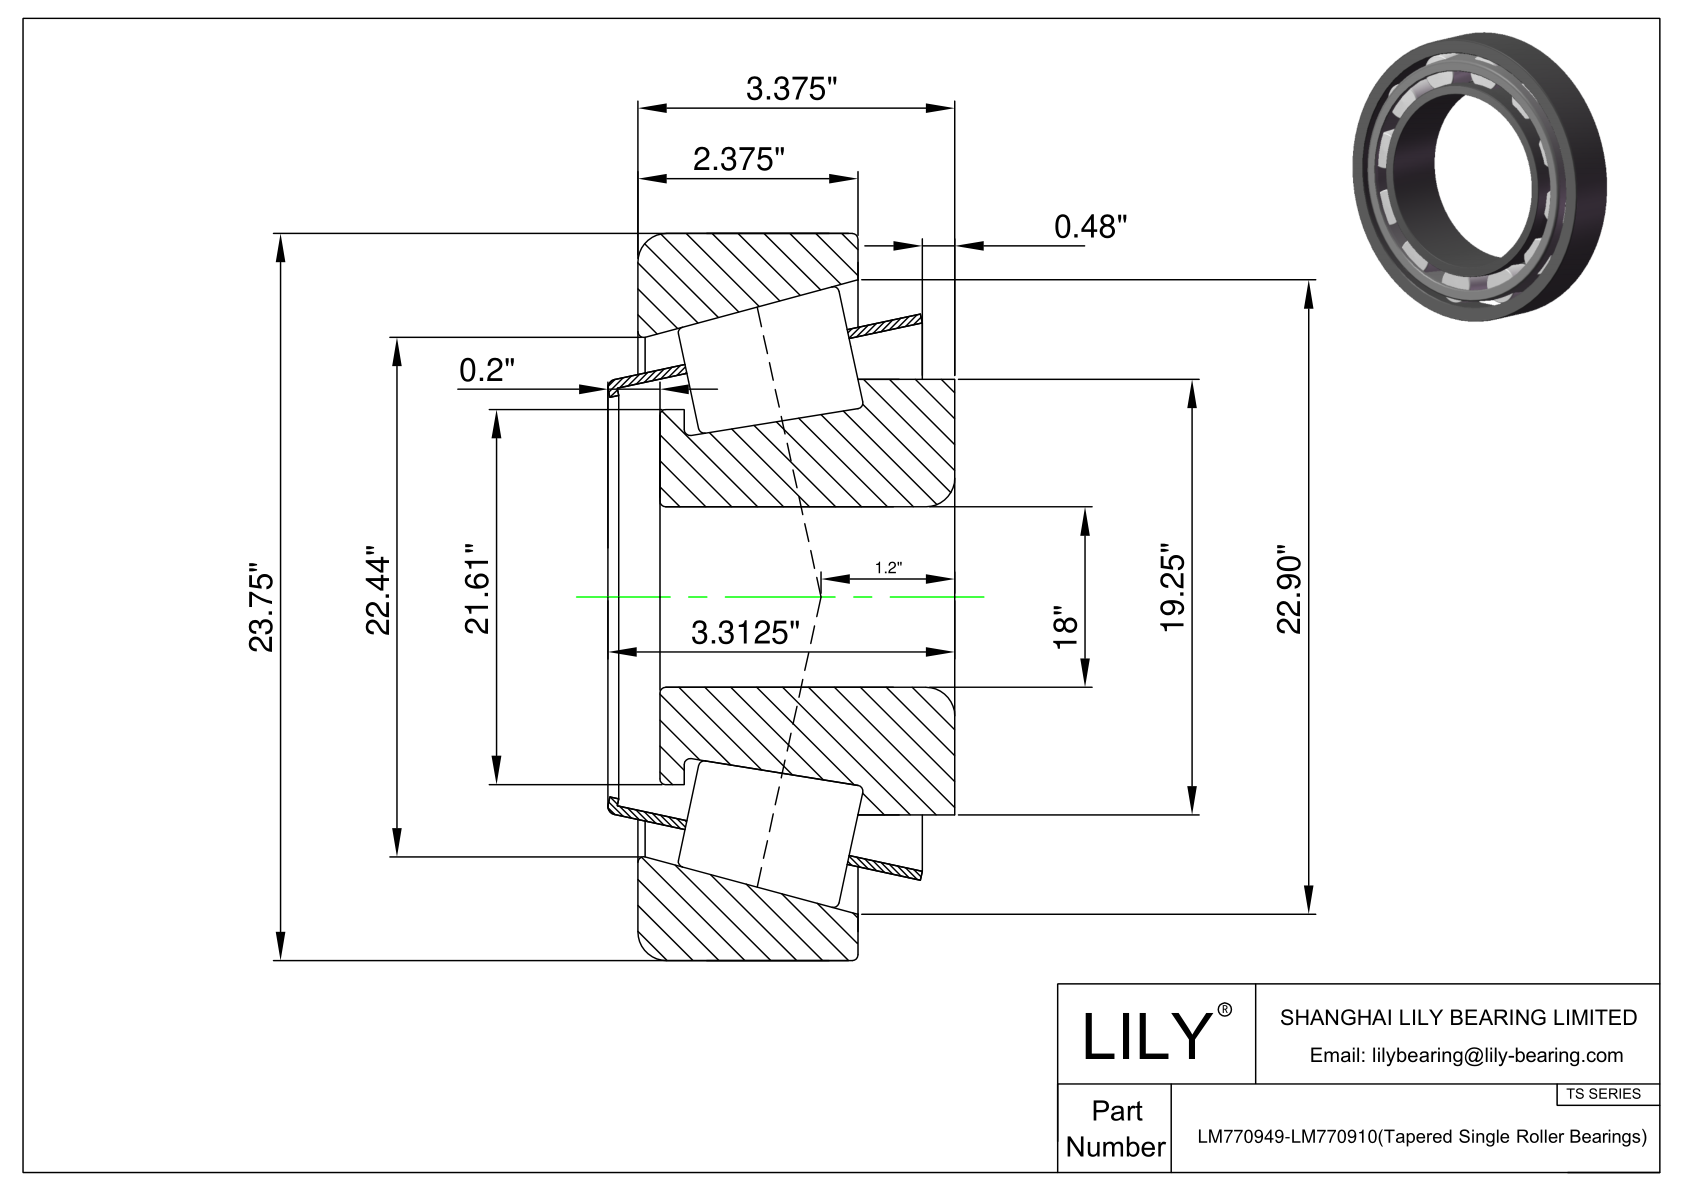 LM770949-LM770910 TS (Tapered Single Roller Bearings) (Imperial) cad drawing